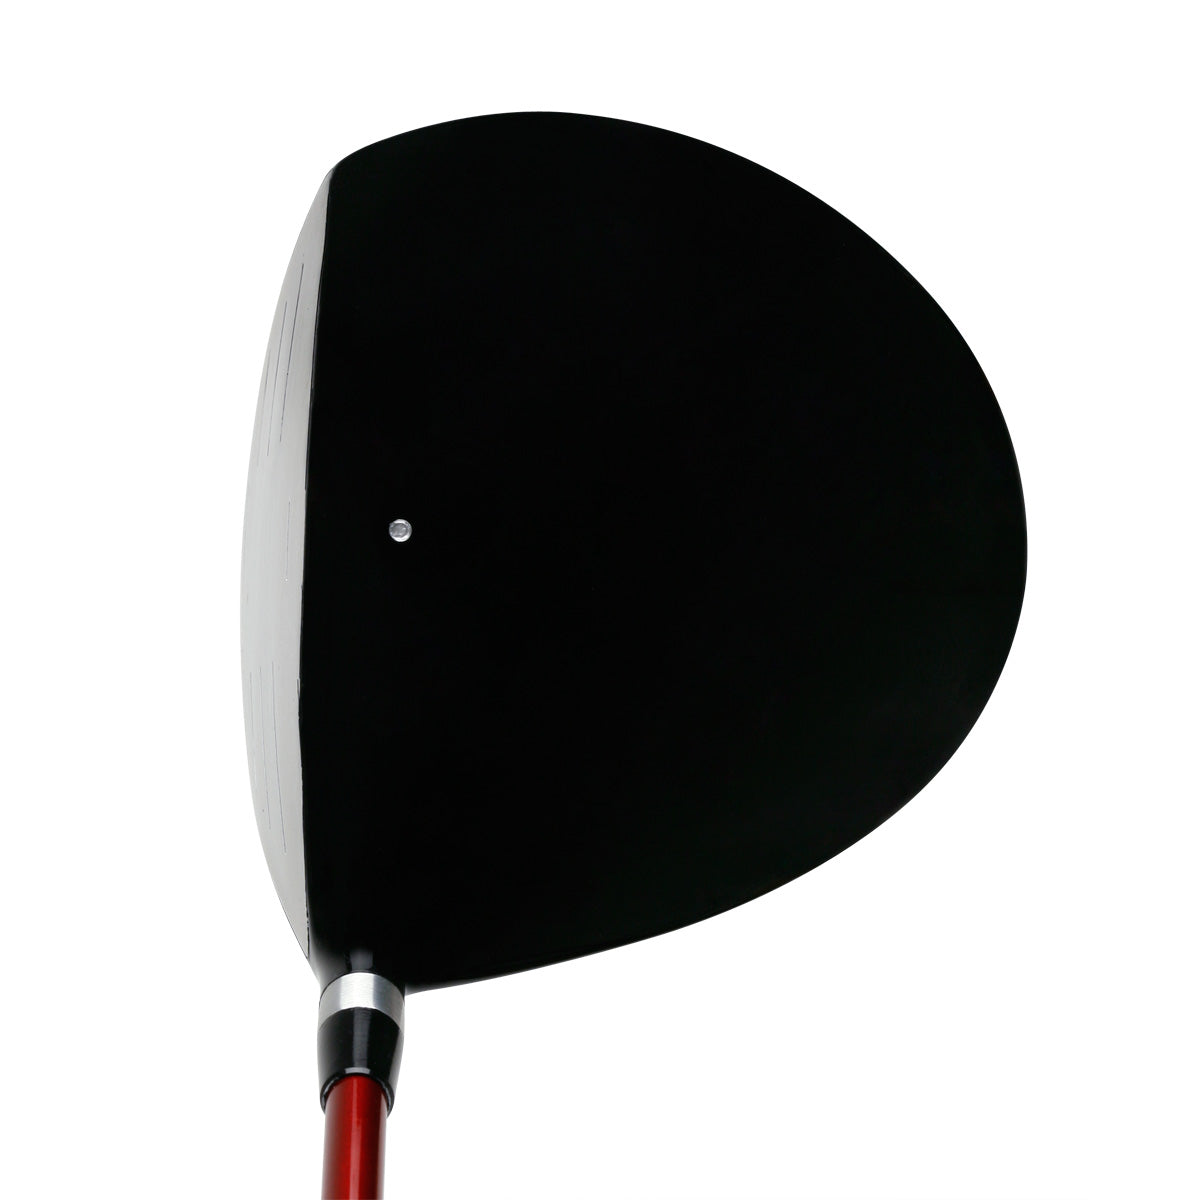 crown view of the Intech Tec+ 460cc Golf Driver